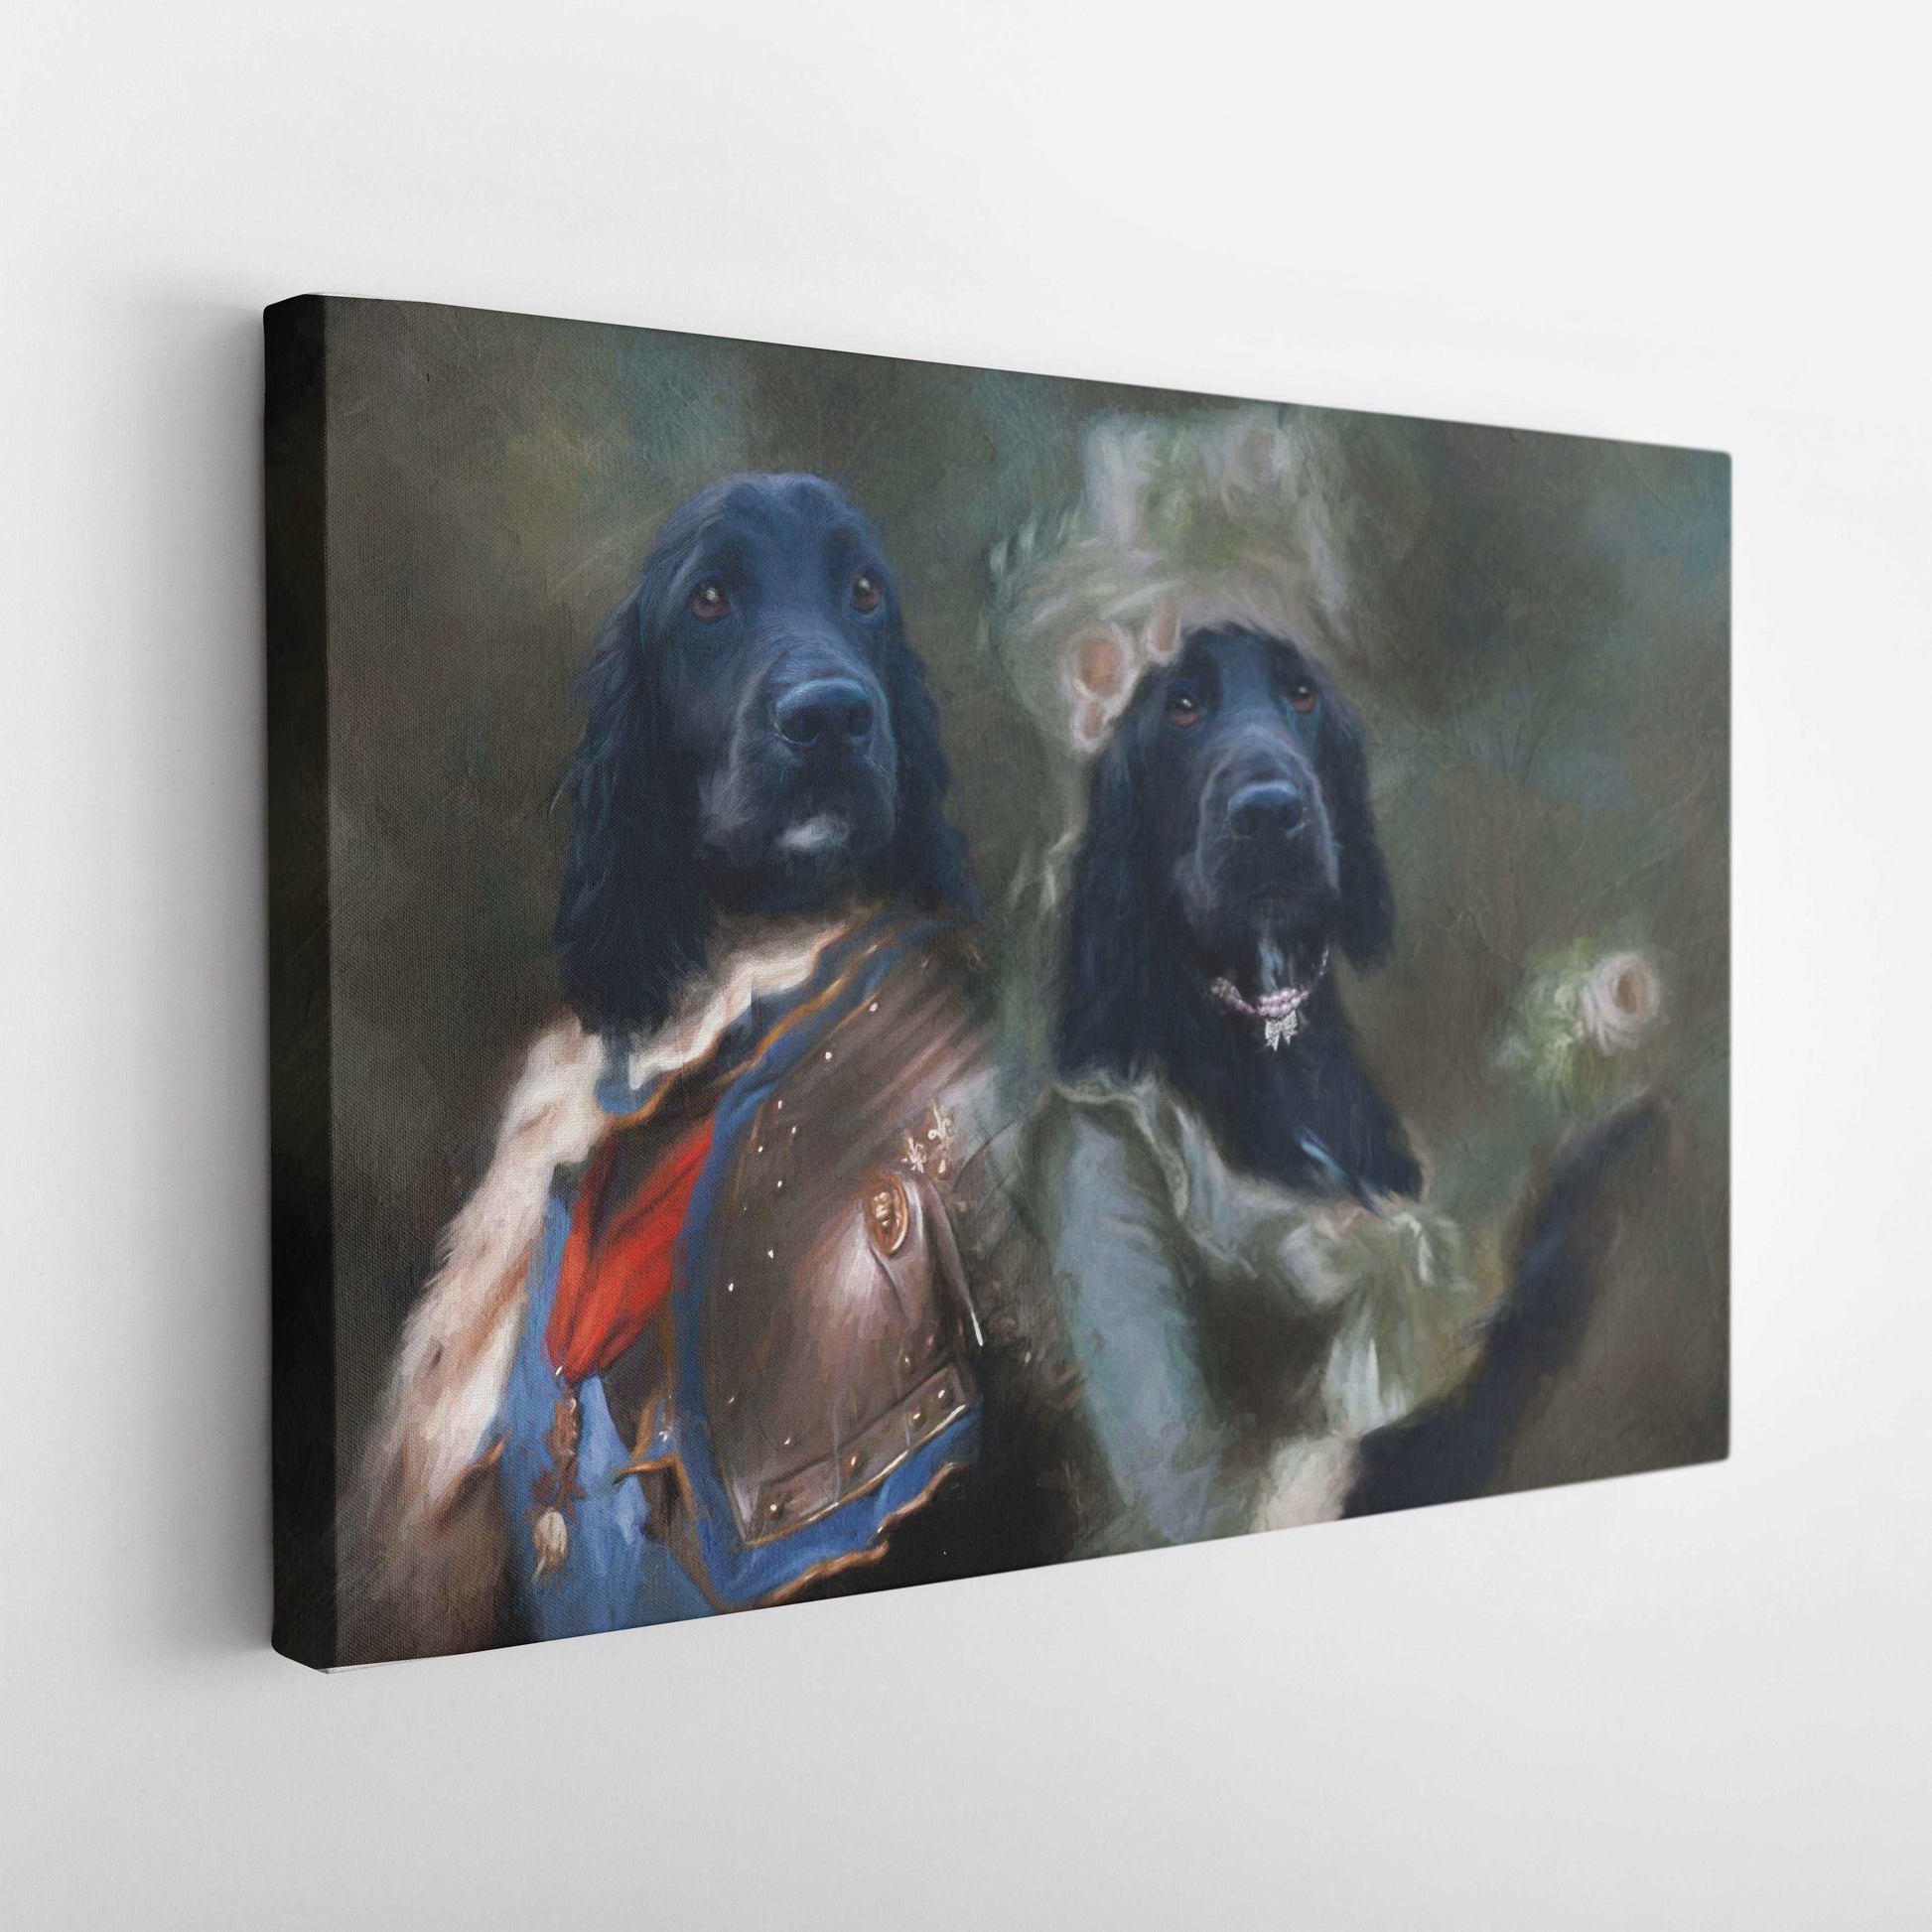 Lord and Lady - Custom Royal Pet Portrait Canvas